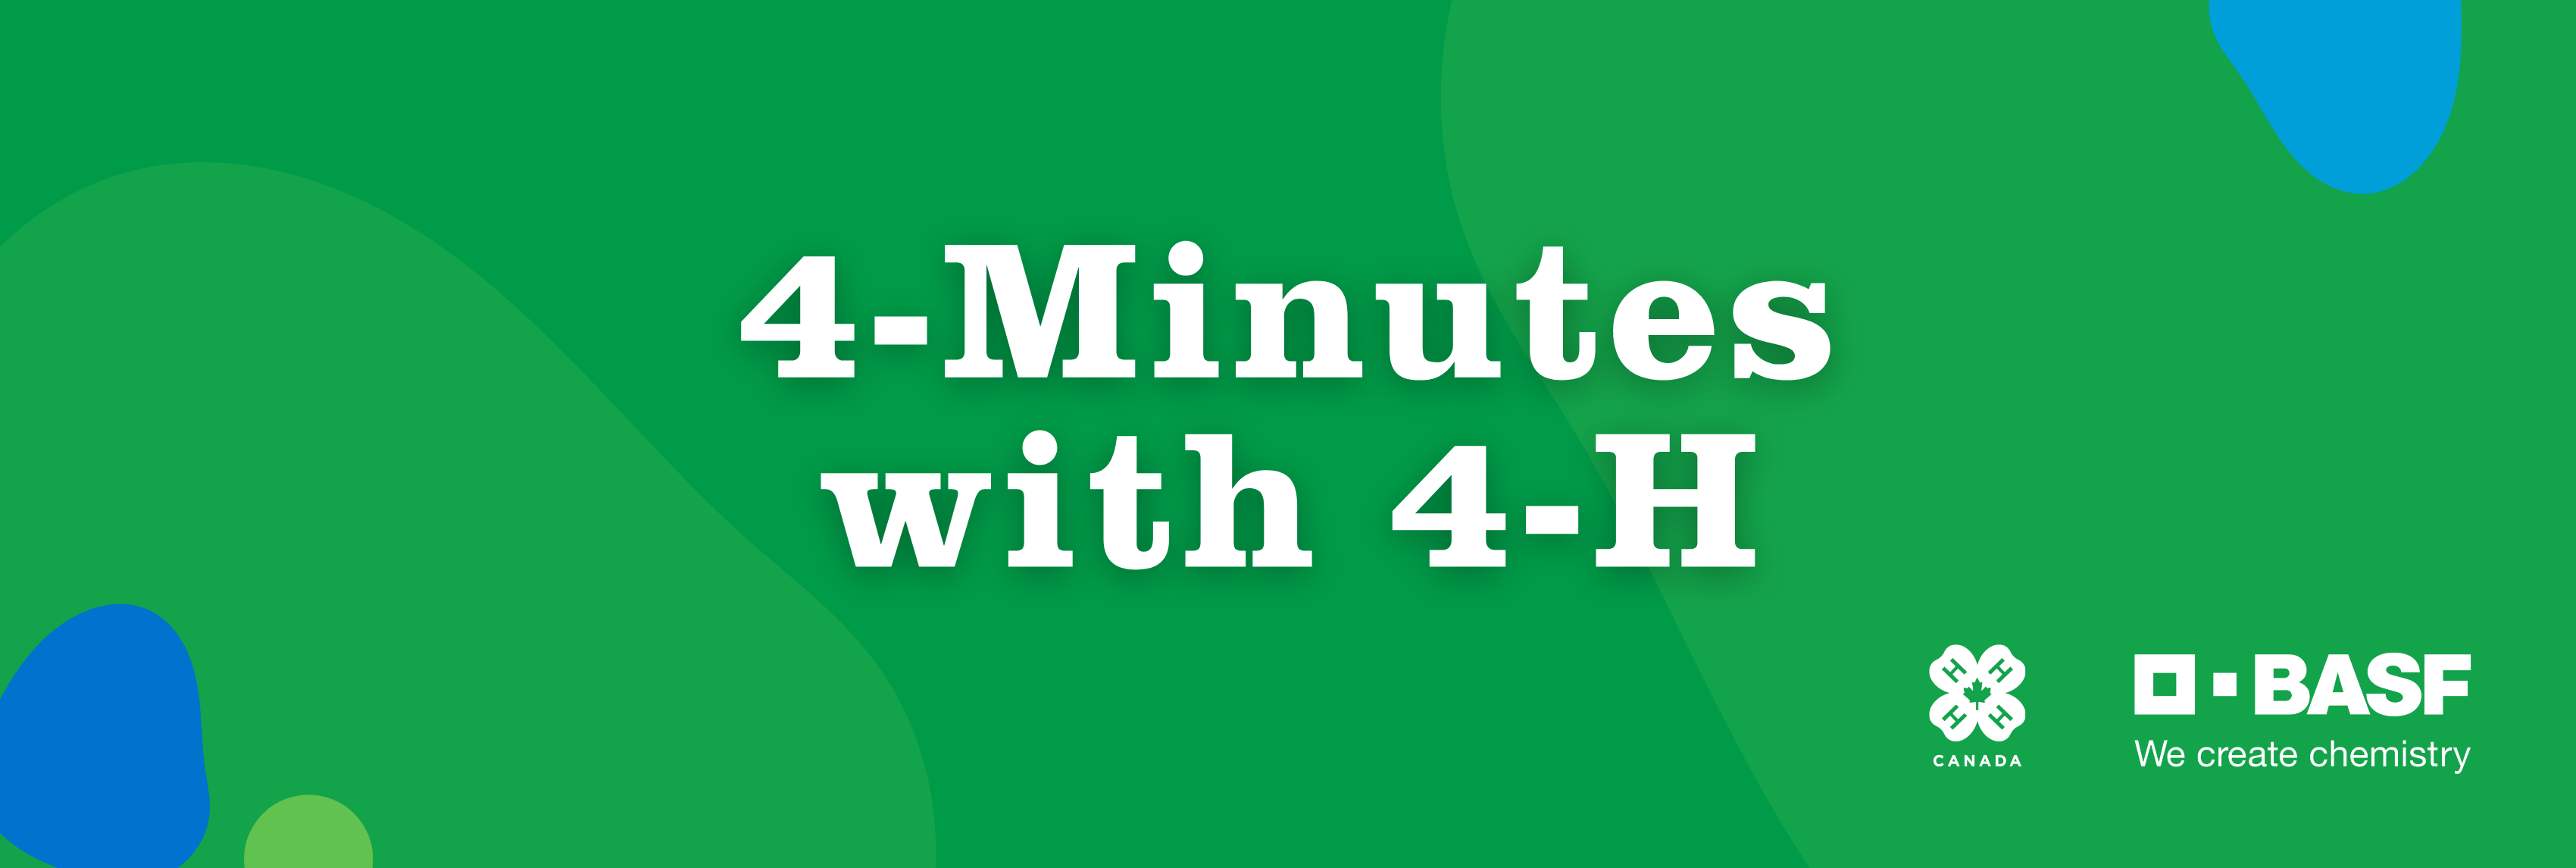 4-Minutes with 4-H